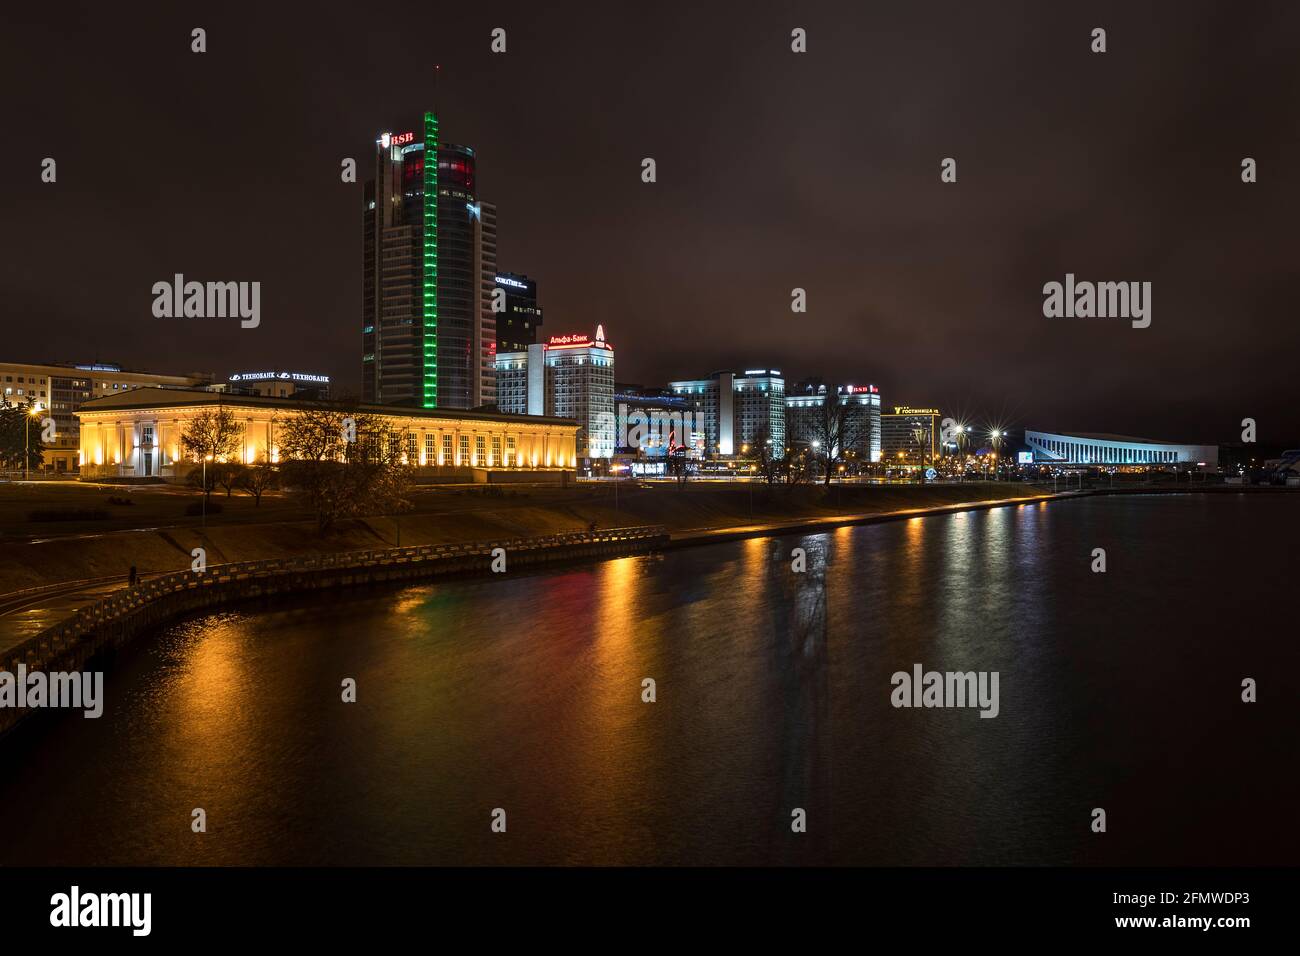 The skyline of Minsk and the river Svislach seen at a rainy night Stock Photo